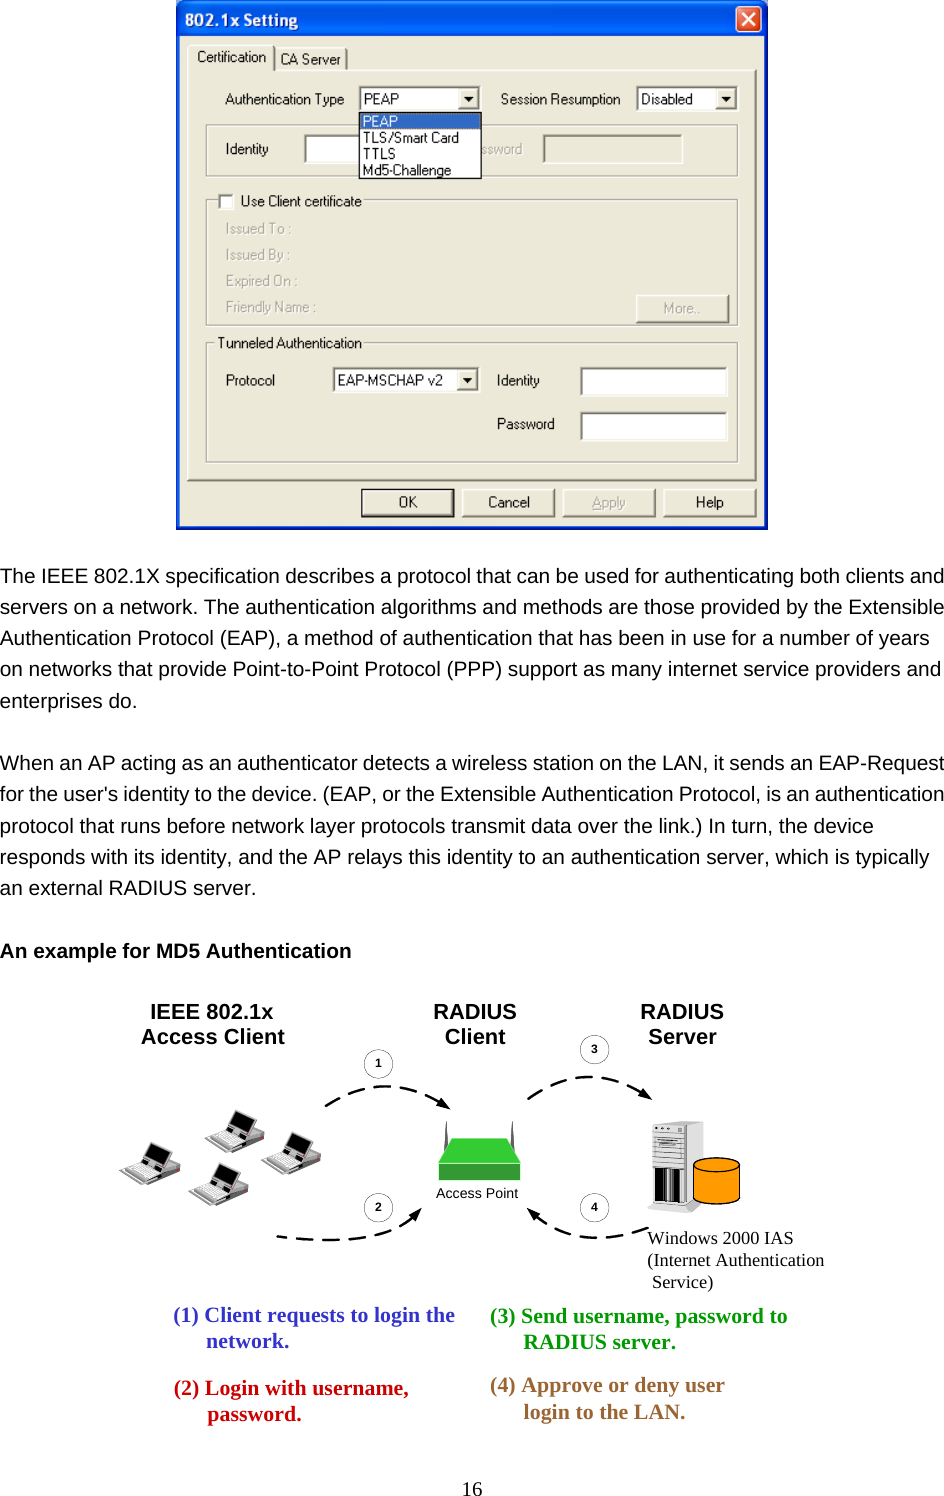  16    The IEEE 802.1X specification describes a protocol that can be used for authenticating both clients and servers on a network. The authentication algorithms and methods are those provided by the Extensible Authentication Protocol (EAP), a method of authentication that has been in use for a number of years on networks that provide Point-to-Point Protocol (PPP) support as many internet service providers and enterprises do.     When an AP acting as an authenticator detects a wireless station on the LAN, it sends an EAP-Request for the user&apos;s identity to the device. (EAP, or the Extensible Authentication Protocol, is an authentication protocol that runs before network layer protocols transmit data over the link.) In turn, the device responds with its identity, and the AP relays this identity to an authentication server, which is typically an external RADIUS server.  An example for MD5 Authentication  RADIUSServerWindows 2000 IAS(Internet AuthenticationService)IEEE 802.1xAccess ClientAccess PointRADIUSClient1234(2) Login with username,password.(1) Client requests to login the      network.(4) Approve or deny userlogin to the LAN.(3) Send username, password to      RADIUS server. 